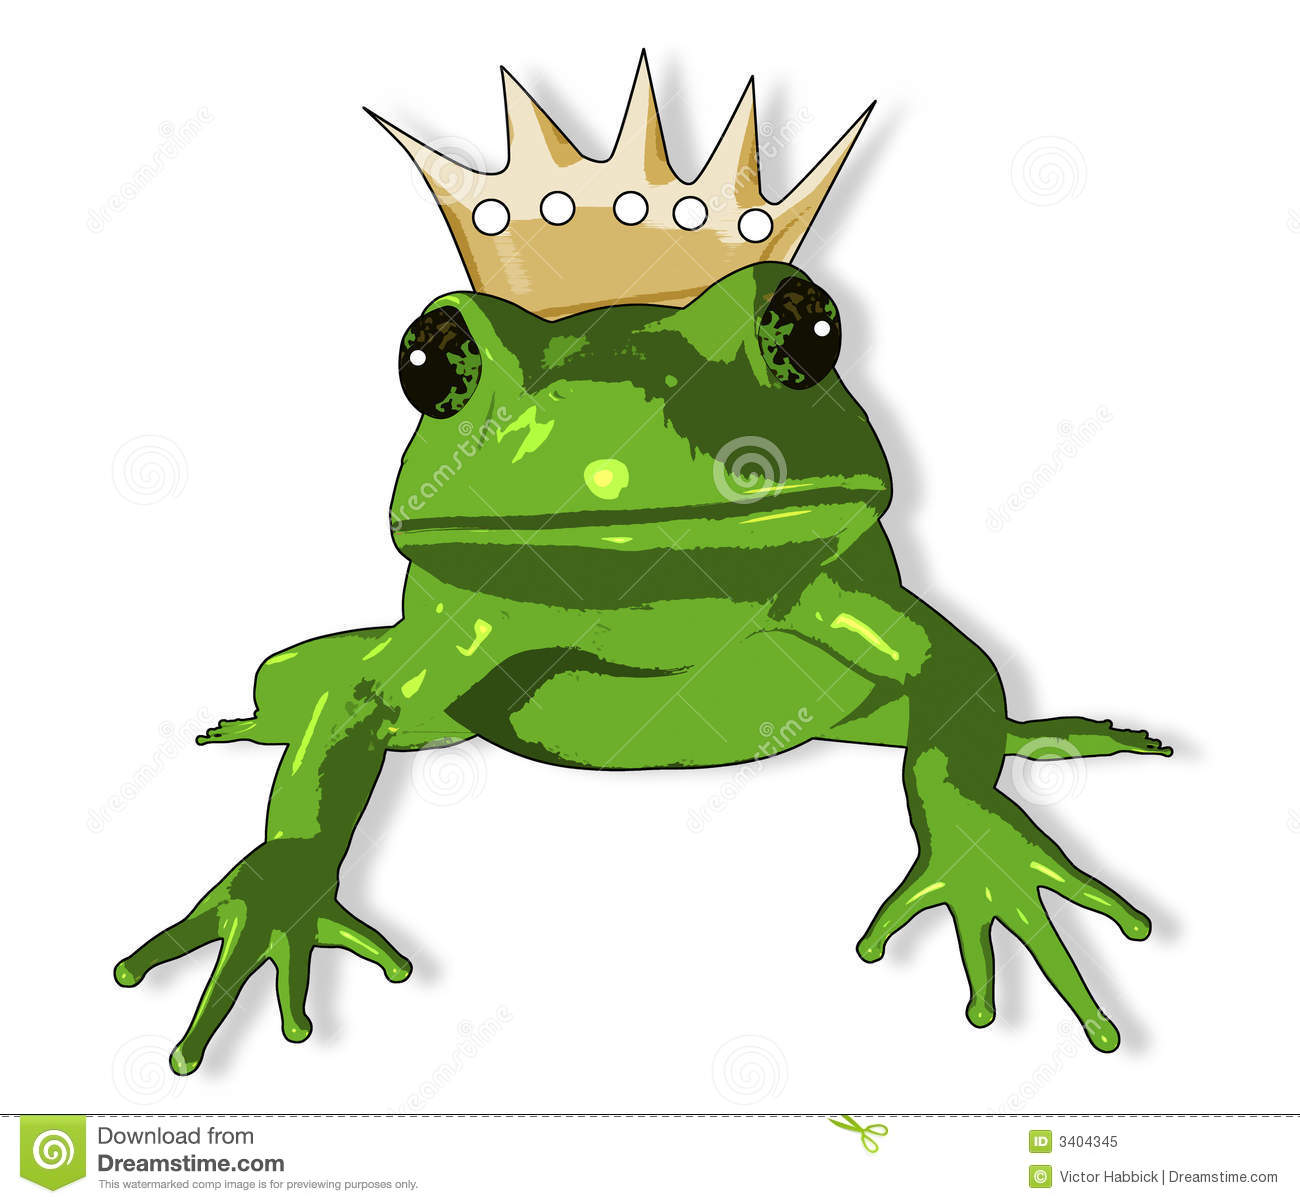 Like Image Of A Frog As Depicted As The Frog Prince In The Fairy Tail